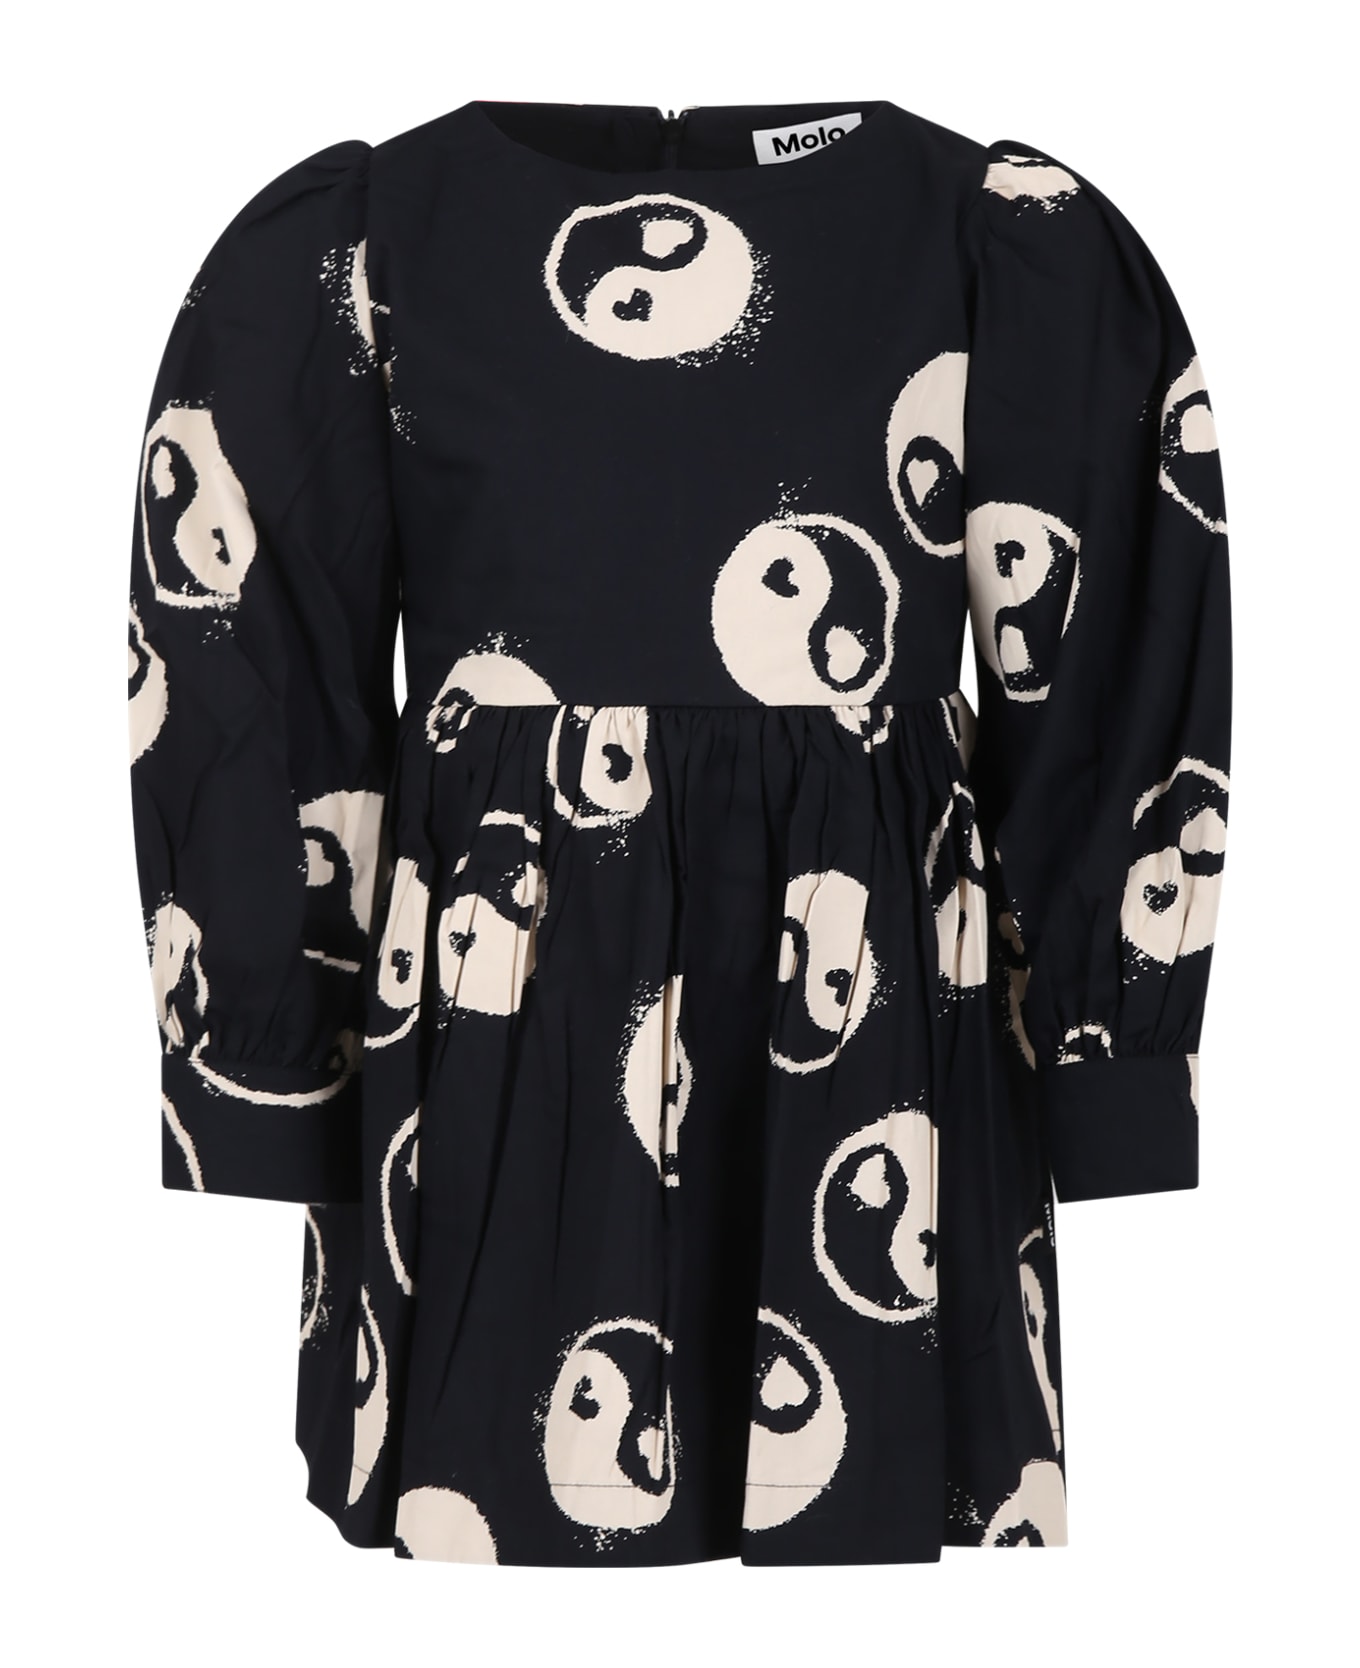 Molo Black Dress For Girl With Yin And Yang Print - Black